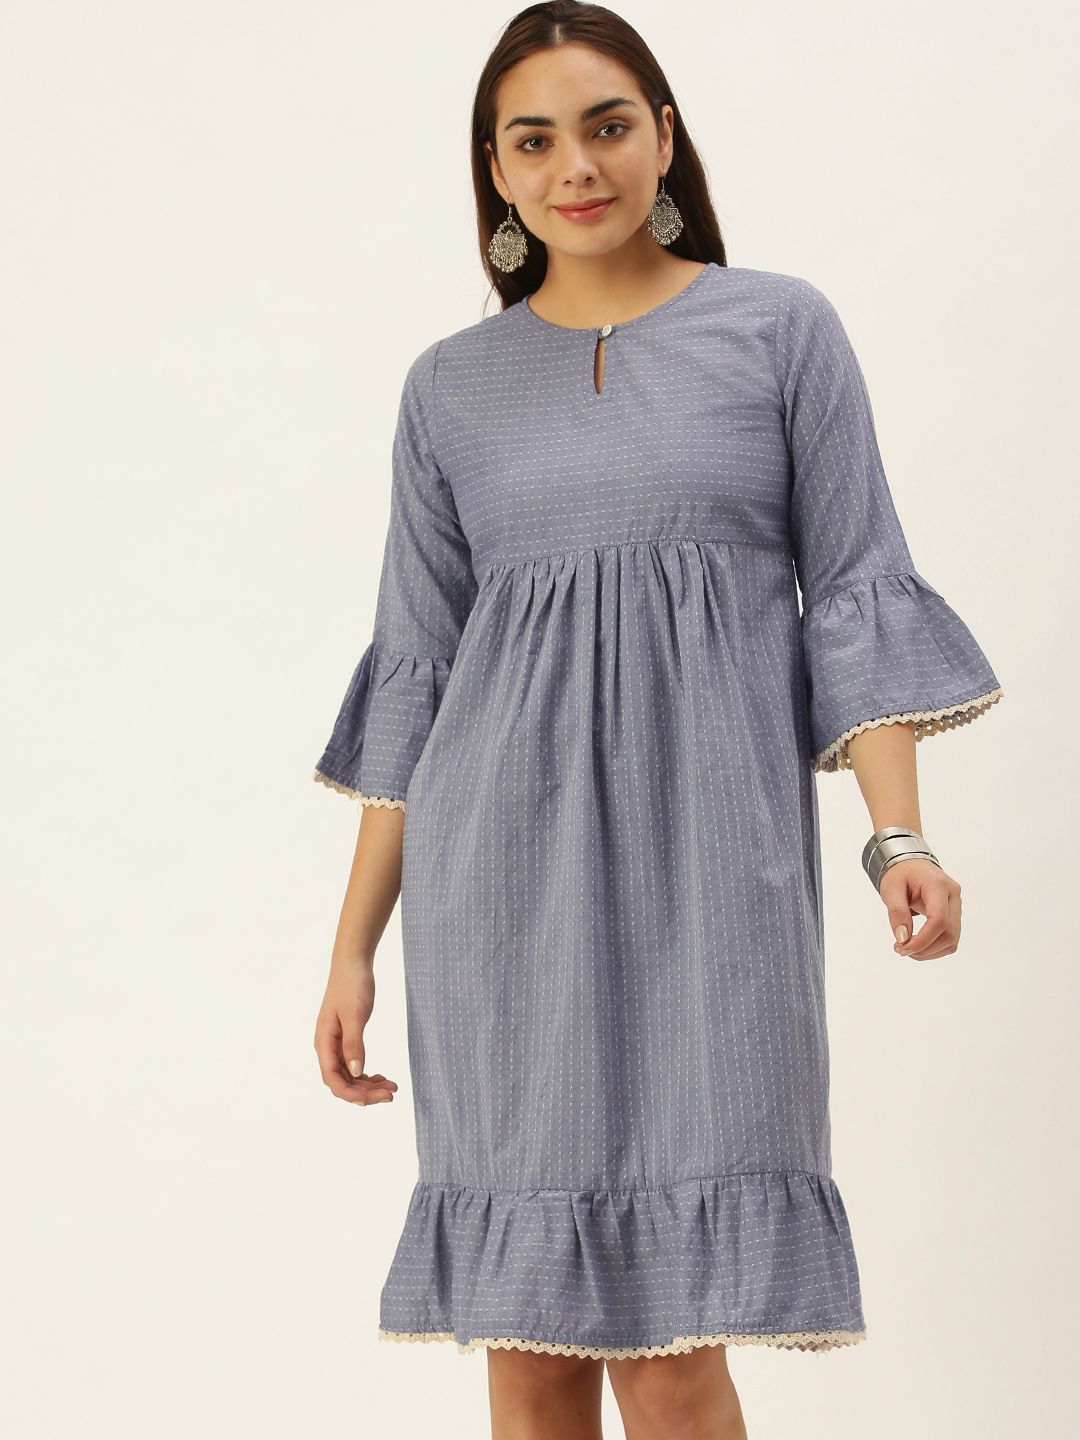 Saanjh Women Grey & Off White Pure Cotton Self Design A-Line Dress Price in India